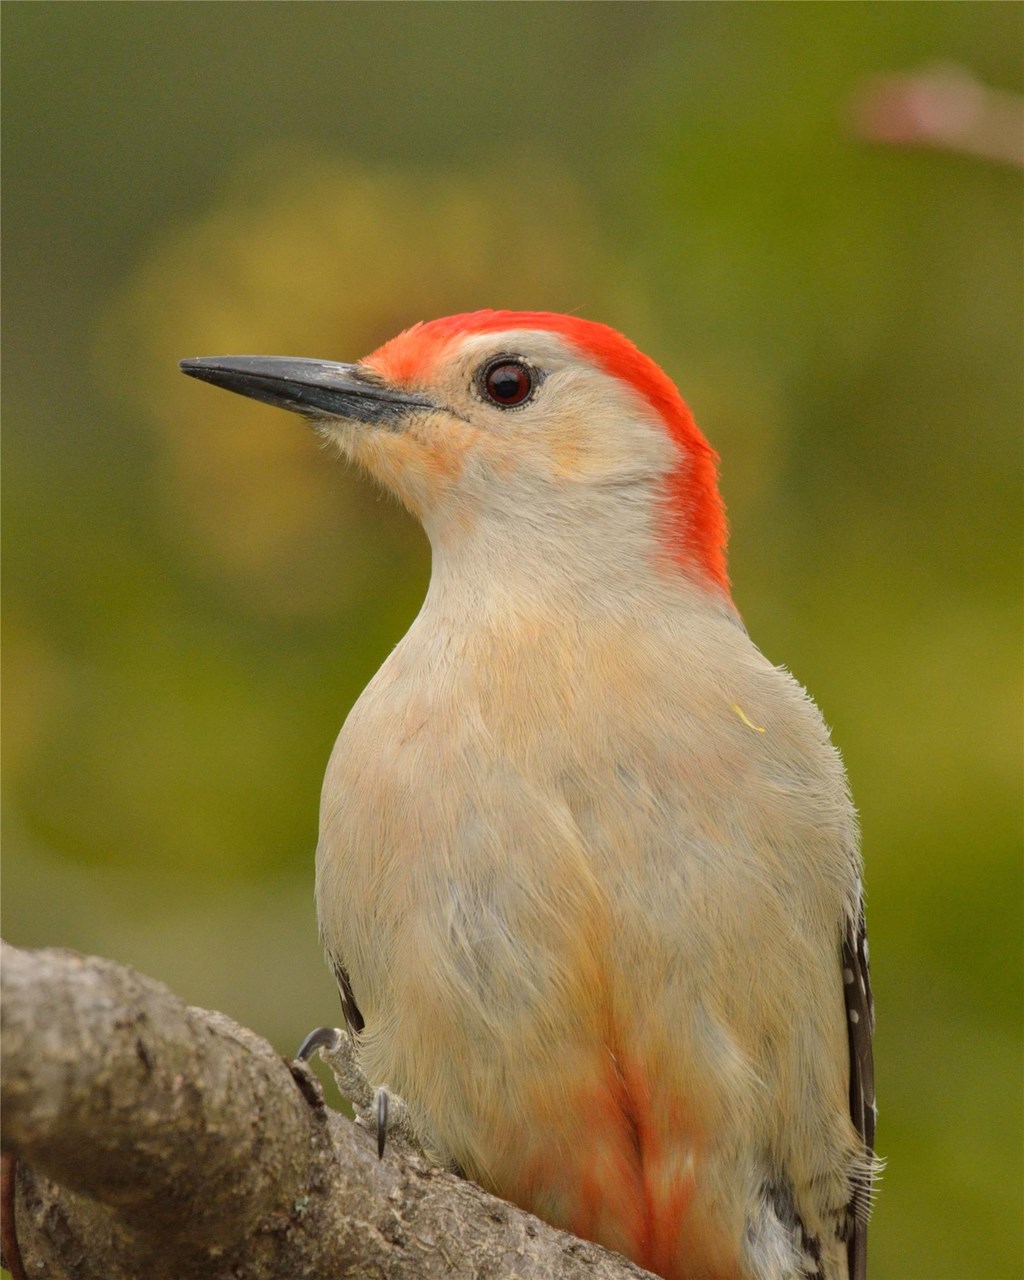 Red-bellied Woodpecker with red belly feathers visible